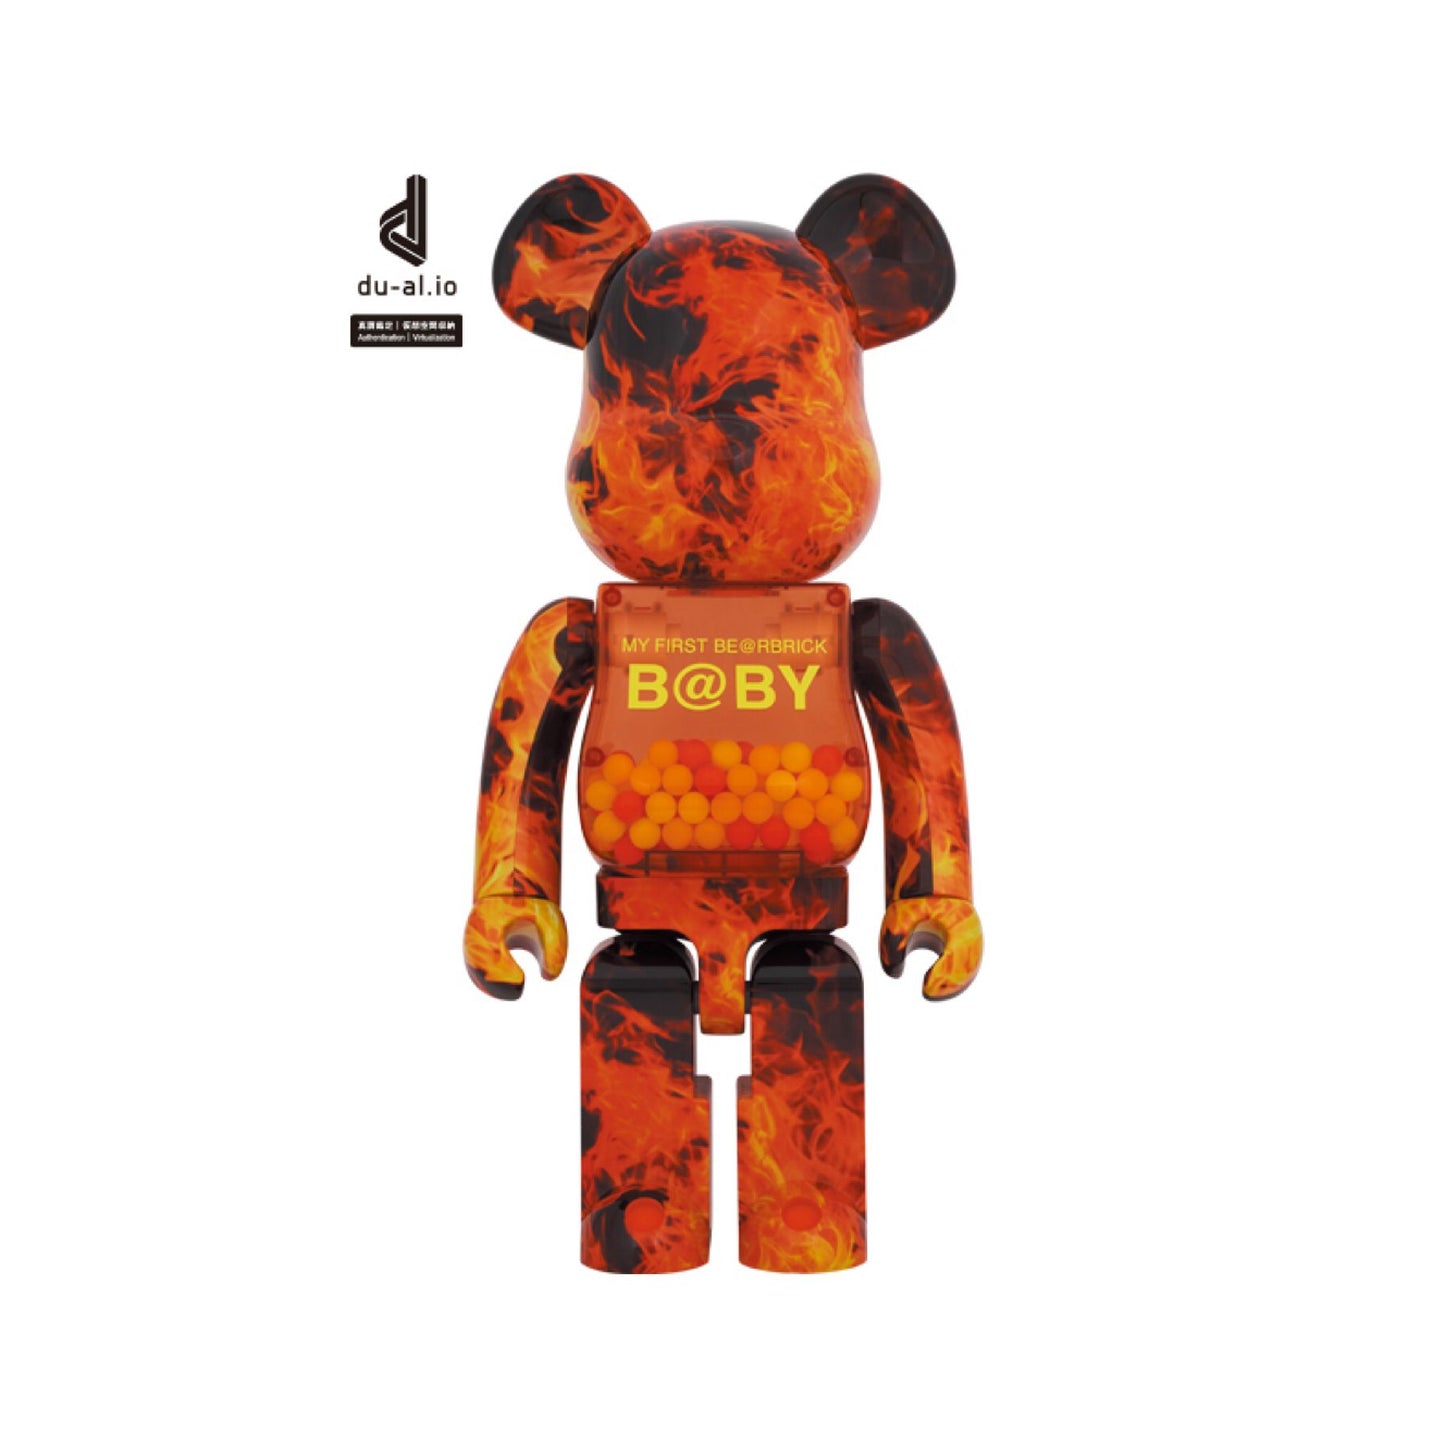 1000% Be@rbrick MON PREMIER BE@RBRICK B@BY FLAME Ver.